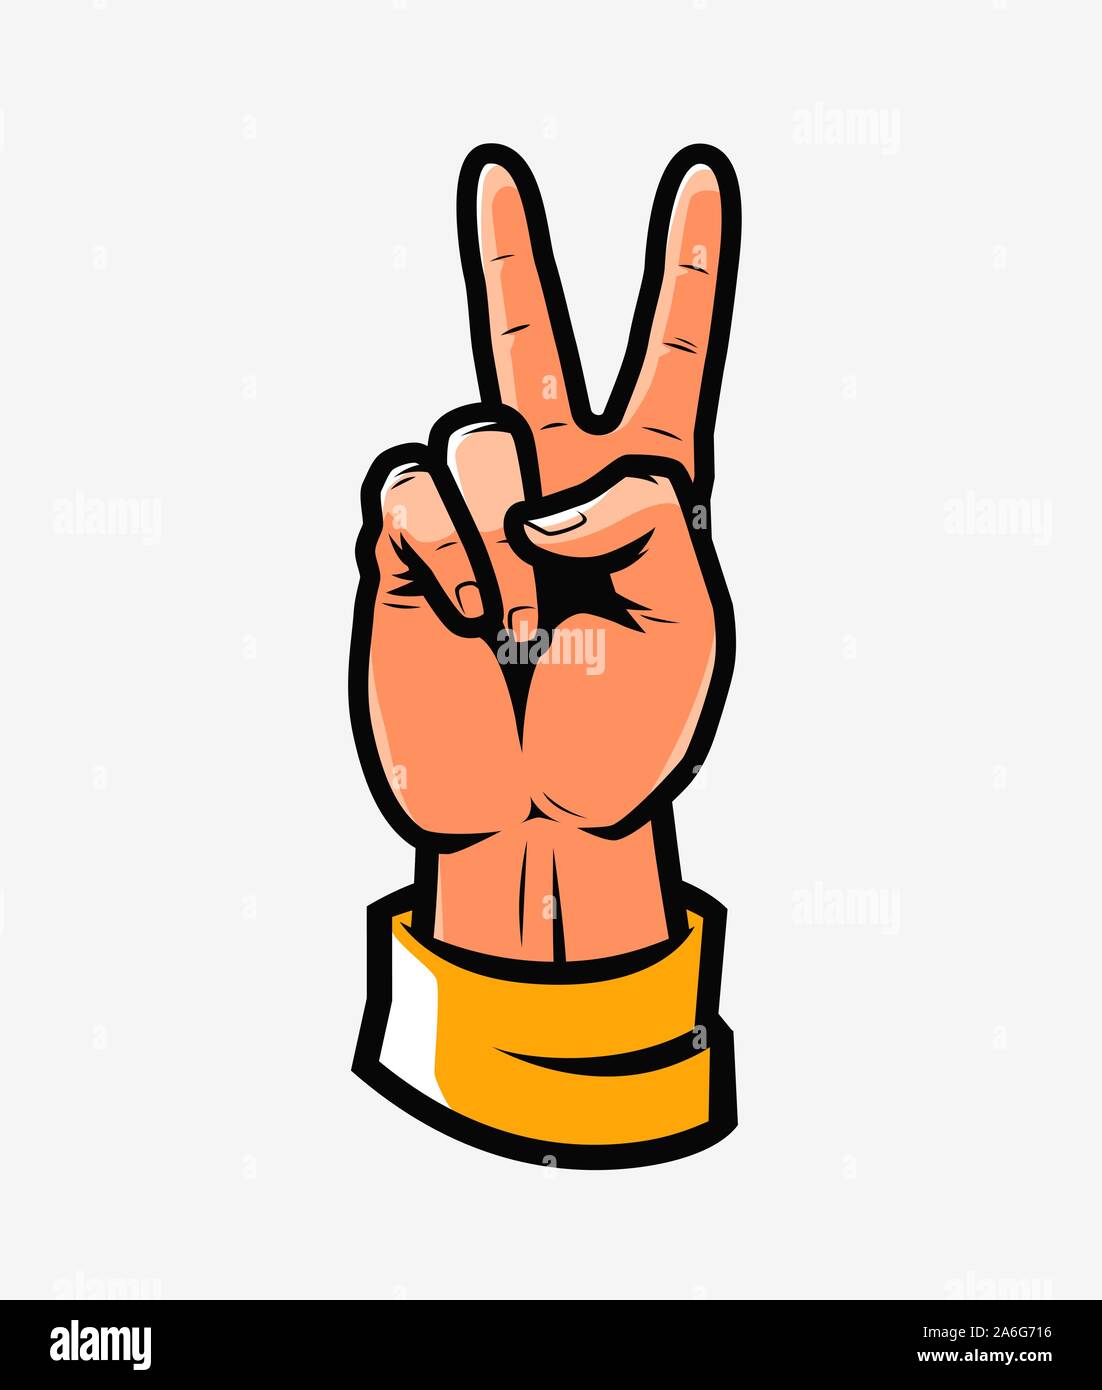 Victory or peace symbol, hand gesture. Vector illustration Stock Vector